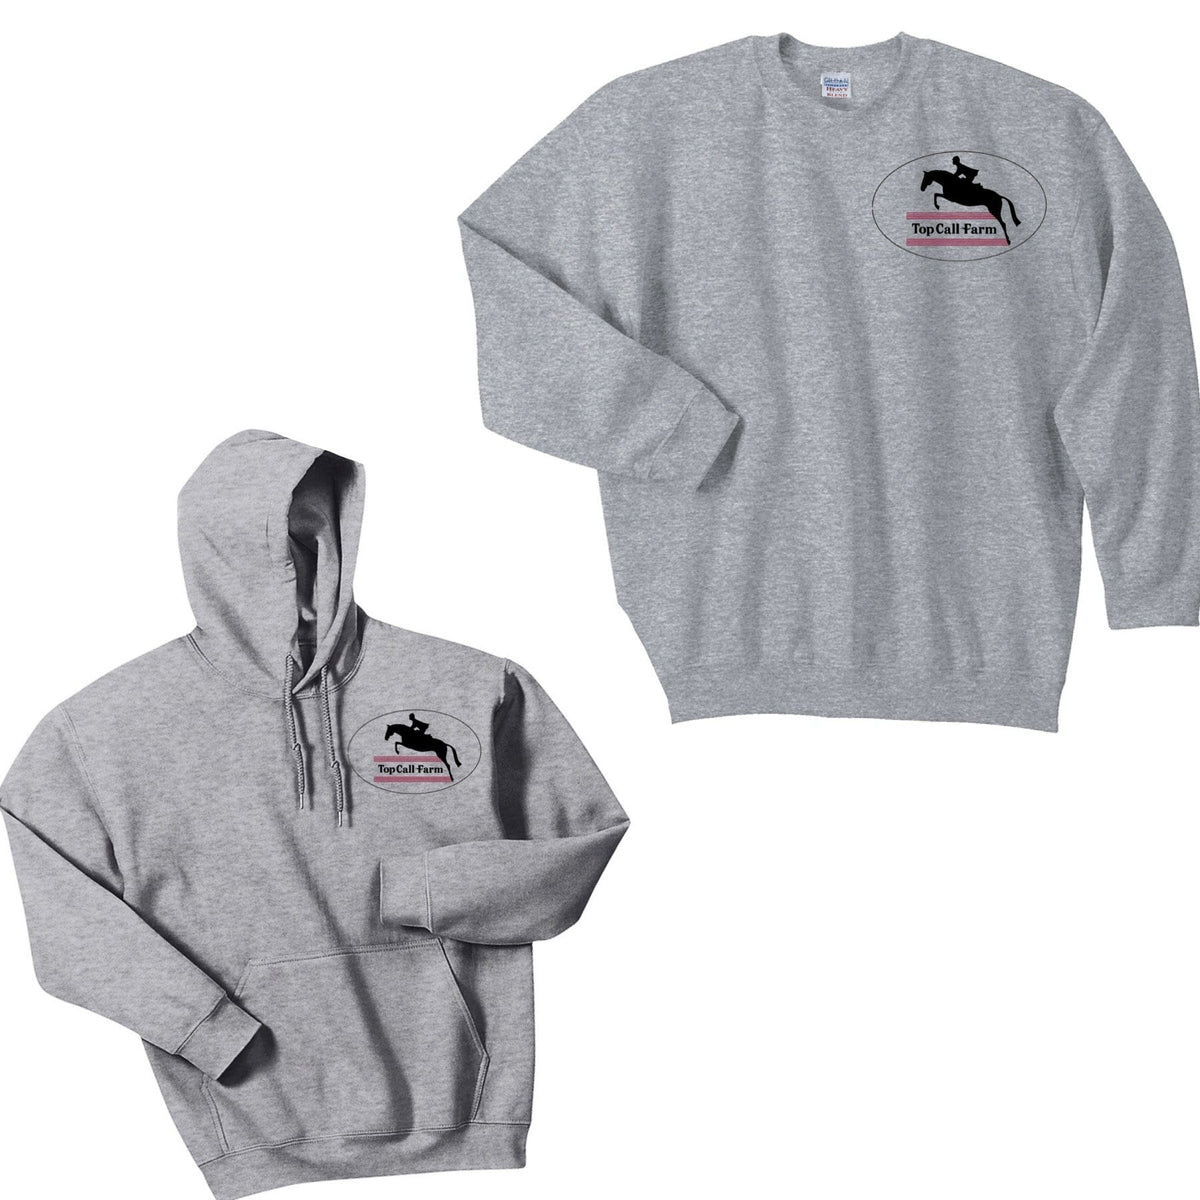 Equestrian Team Apparel Top Call Farm Sweatshirt/Hoodie equestrian team apparel online tack store mobile tack store custom farm apparel custom show stable clothing equestrian lifestyle horse show clothing riding clothes horses equestrian tack store